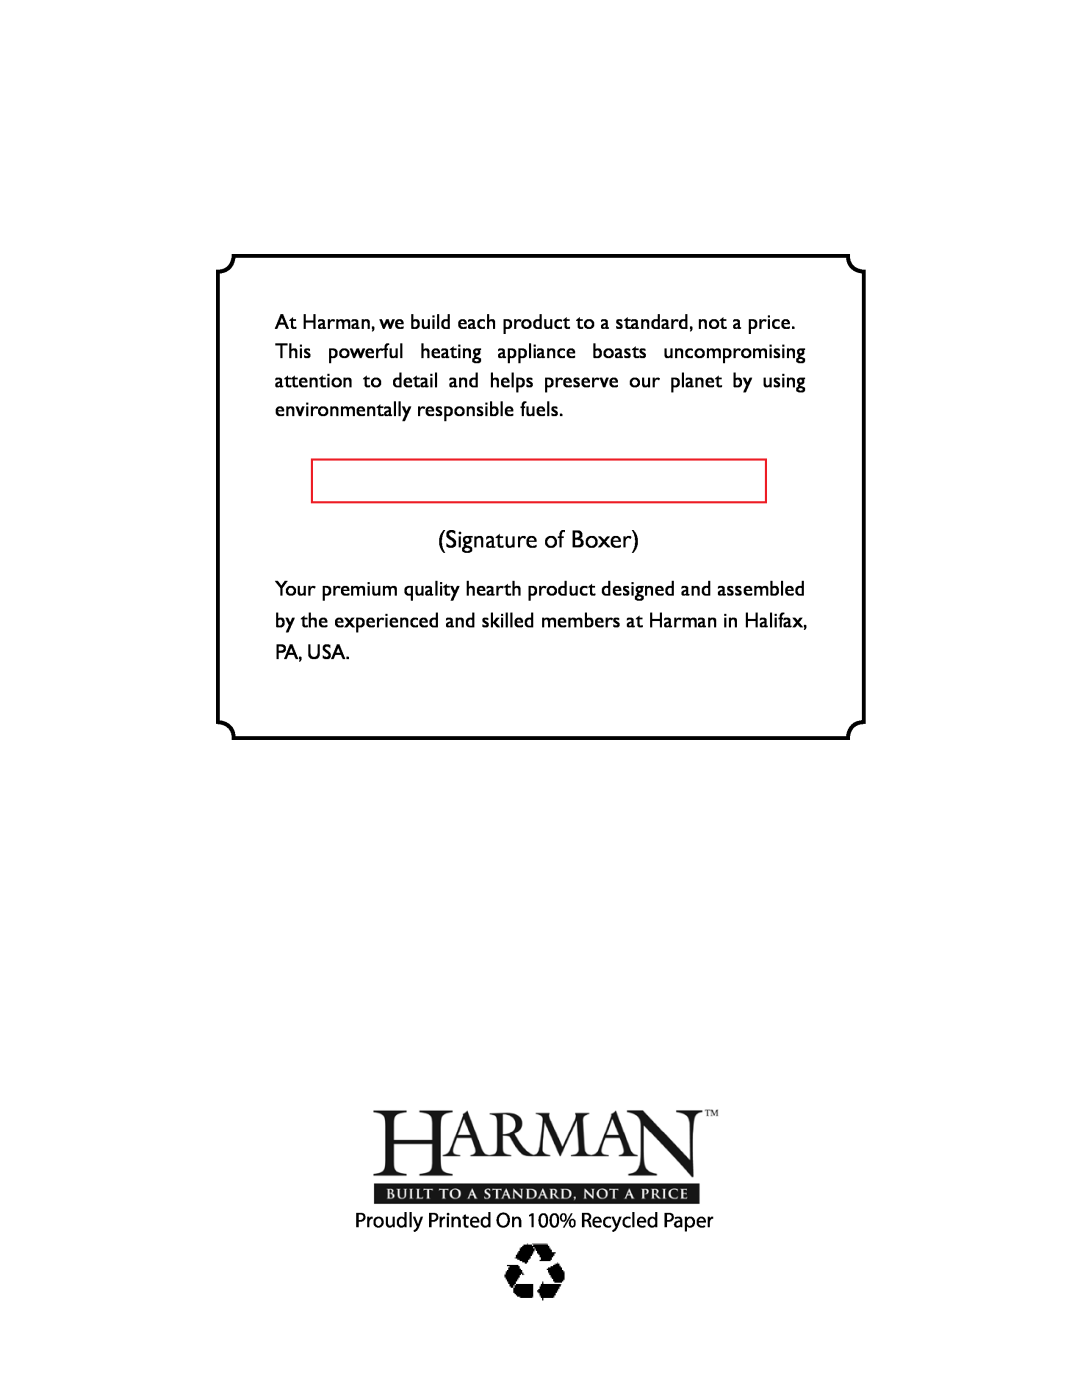 Harman Stove Company 1-90-79700 owner manual Signature of Boxer, Proudly Printed On 100% Recycled Paper 